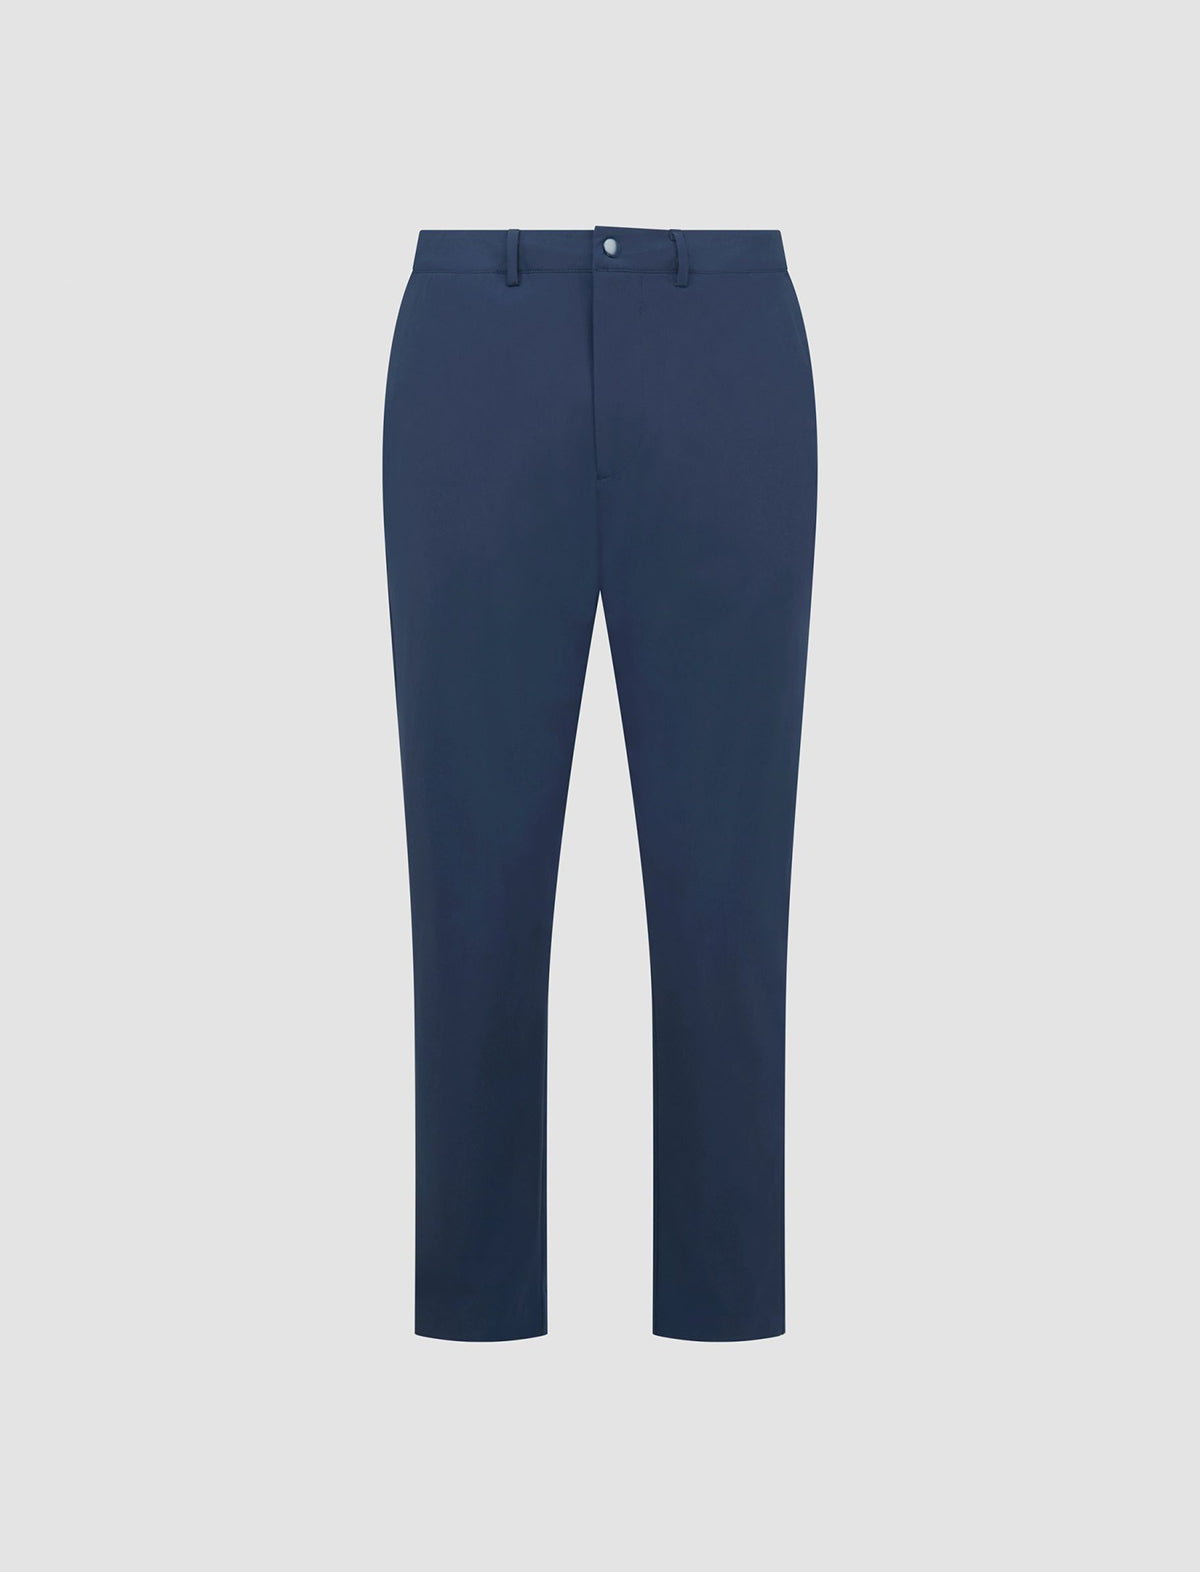 MANORS GOLF The Course Trouser in Navy